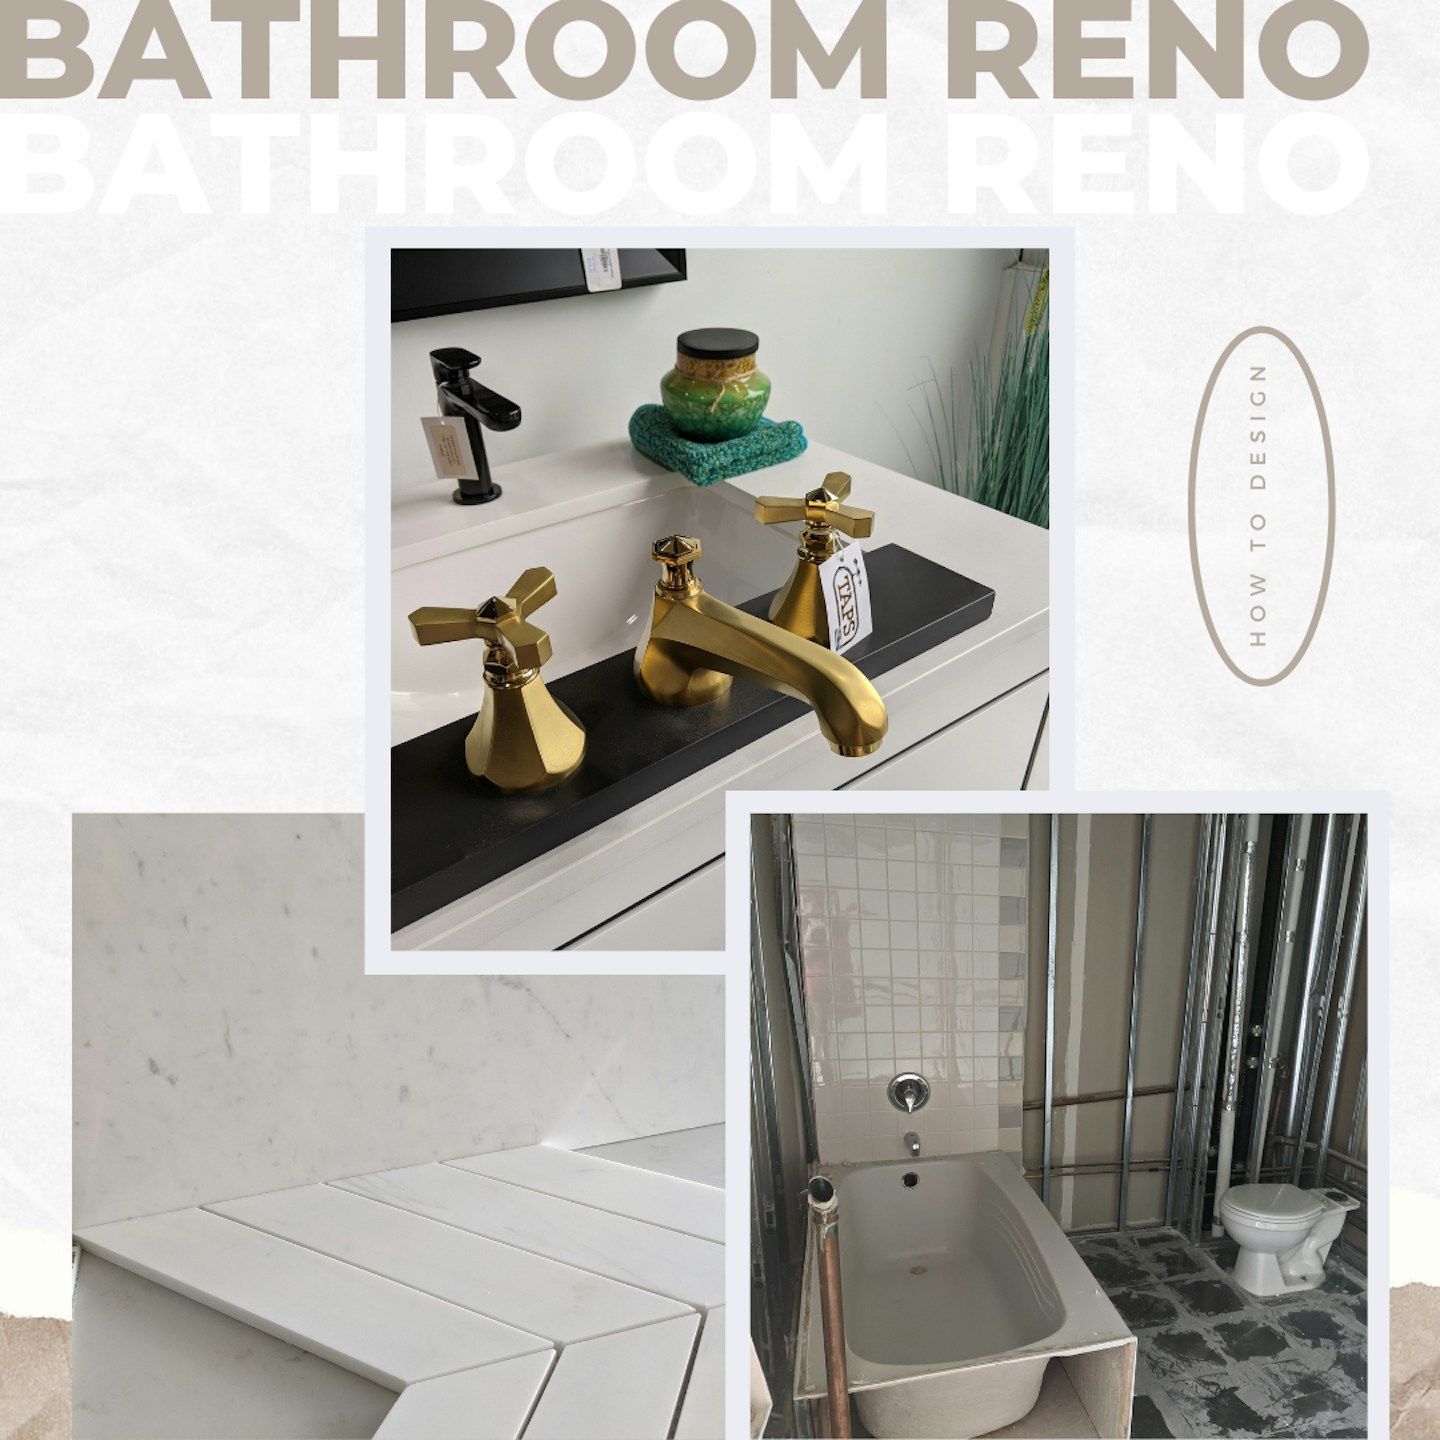 How to design a bathroom without a designer: tips on how to get a high-end look on your own, where to find the best products and how to save money in the process! I am outlining my design process on how we chose our fixtures, designed our layout and found great deals on natural stone finishes.